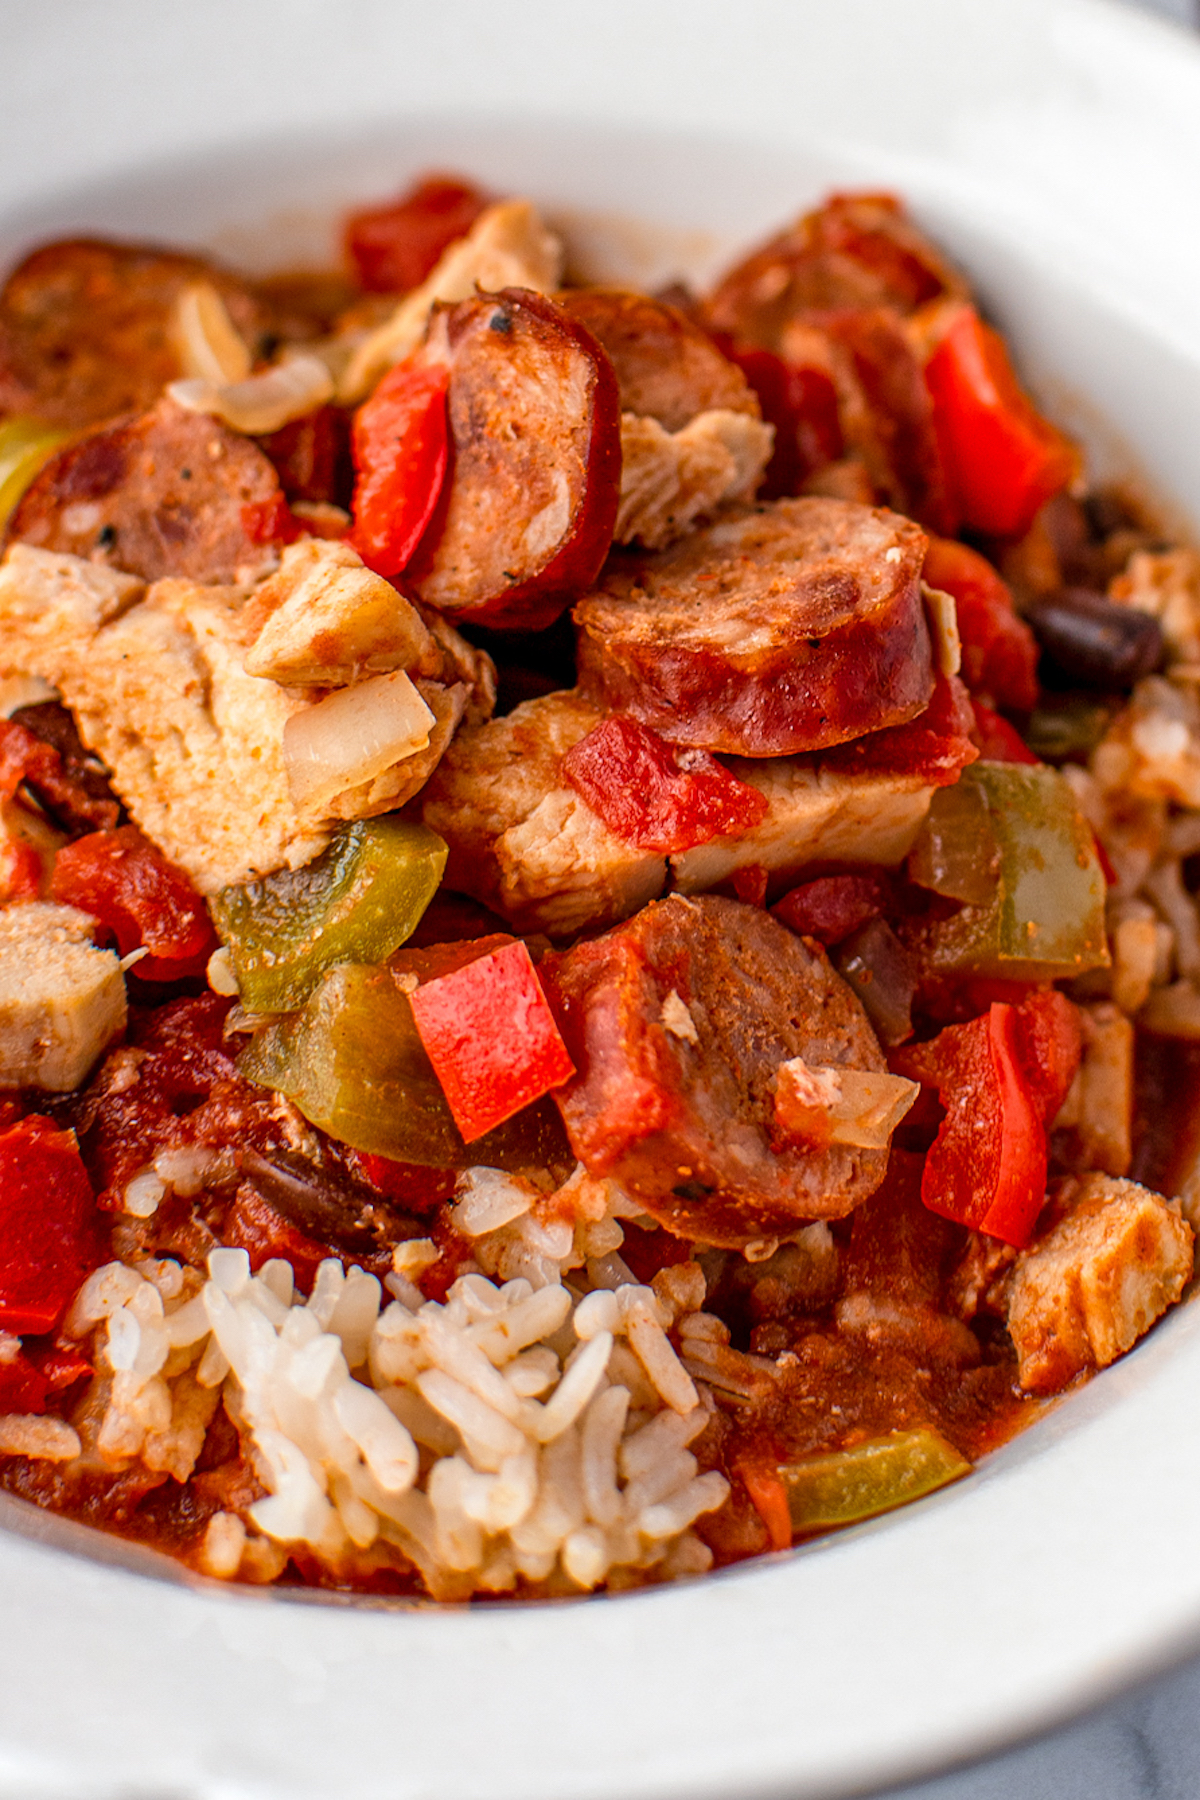 Close-up shot of cajun chicken and sausage over rice.